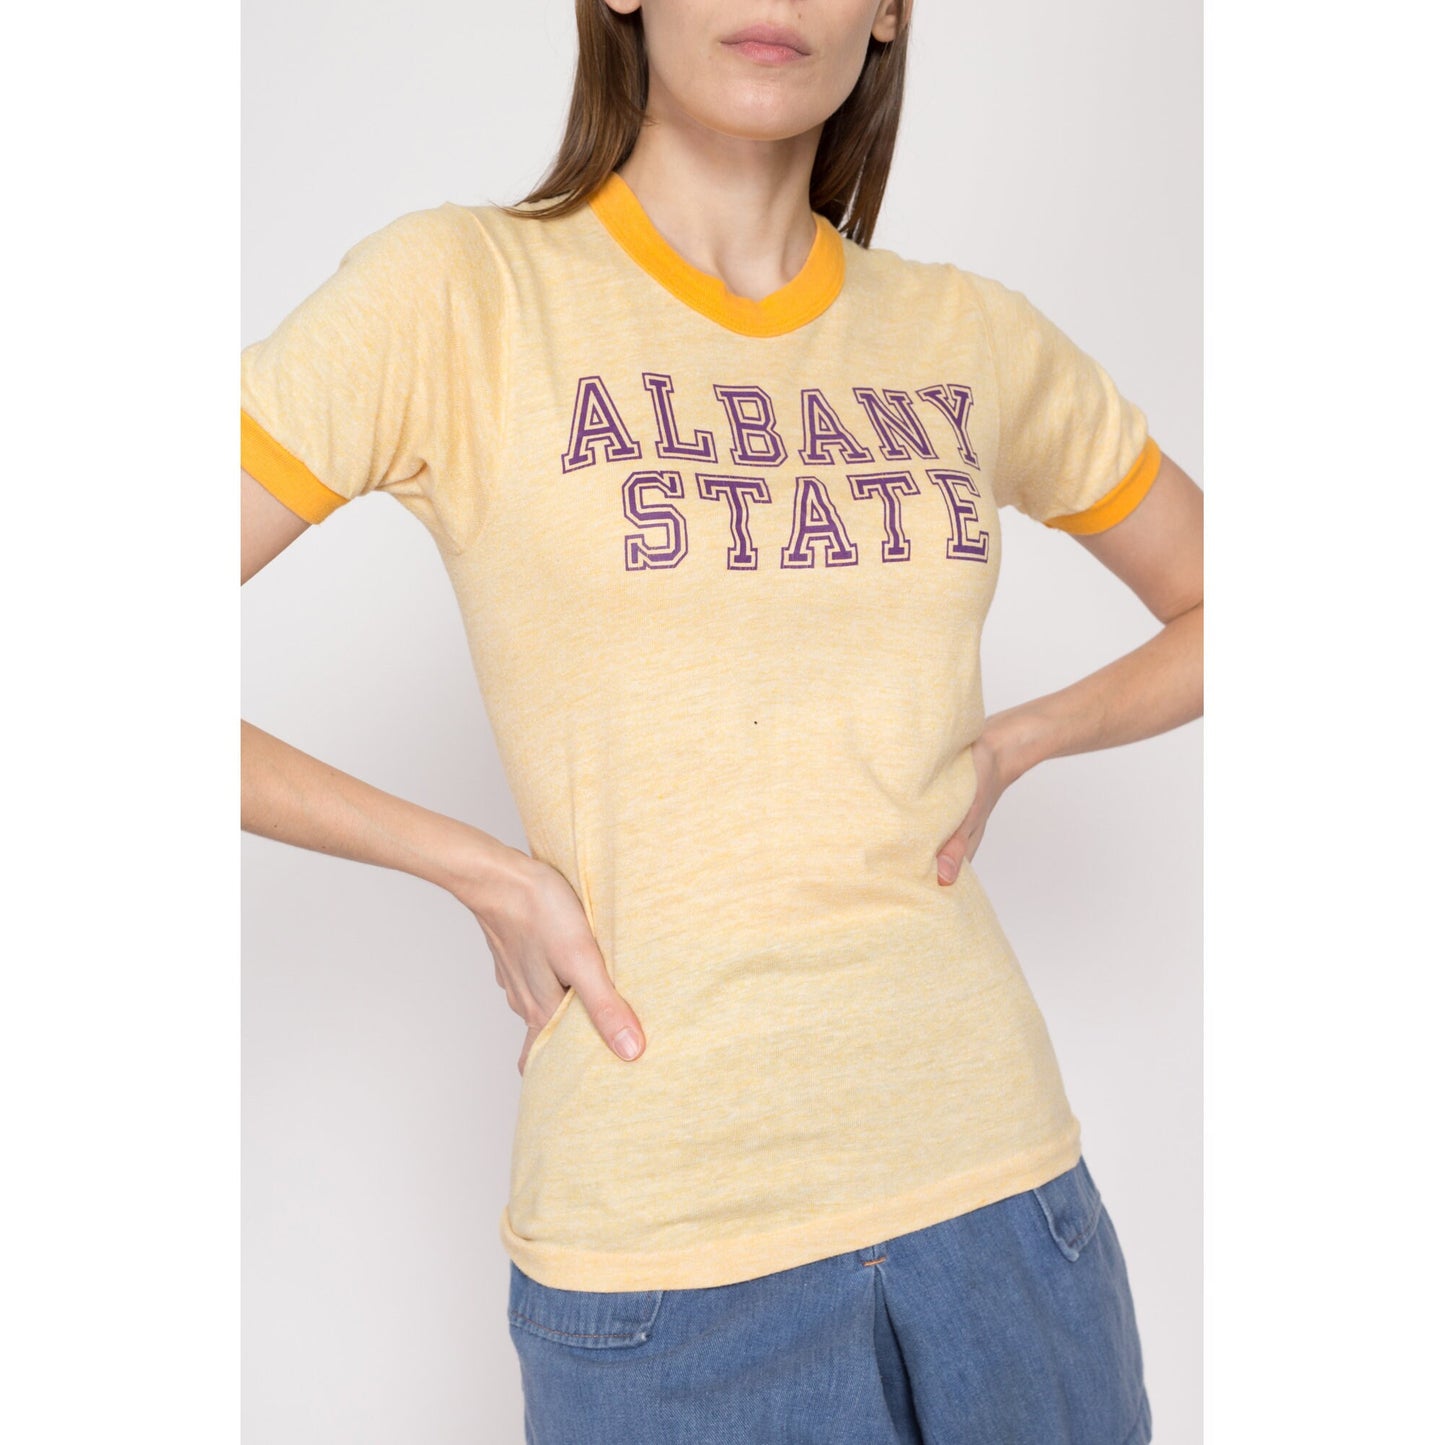 Small 80s Albany State Ringer T Shirt | Vintage Yellow Graphic University College Tee